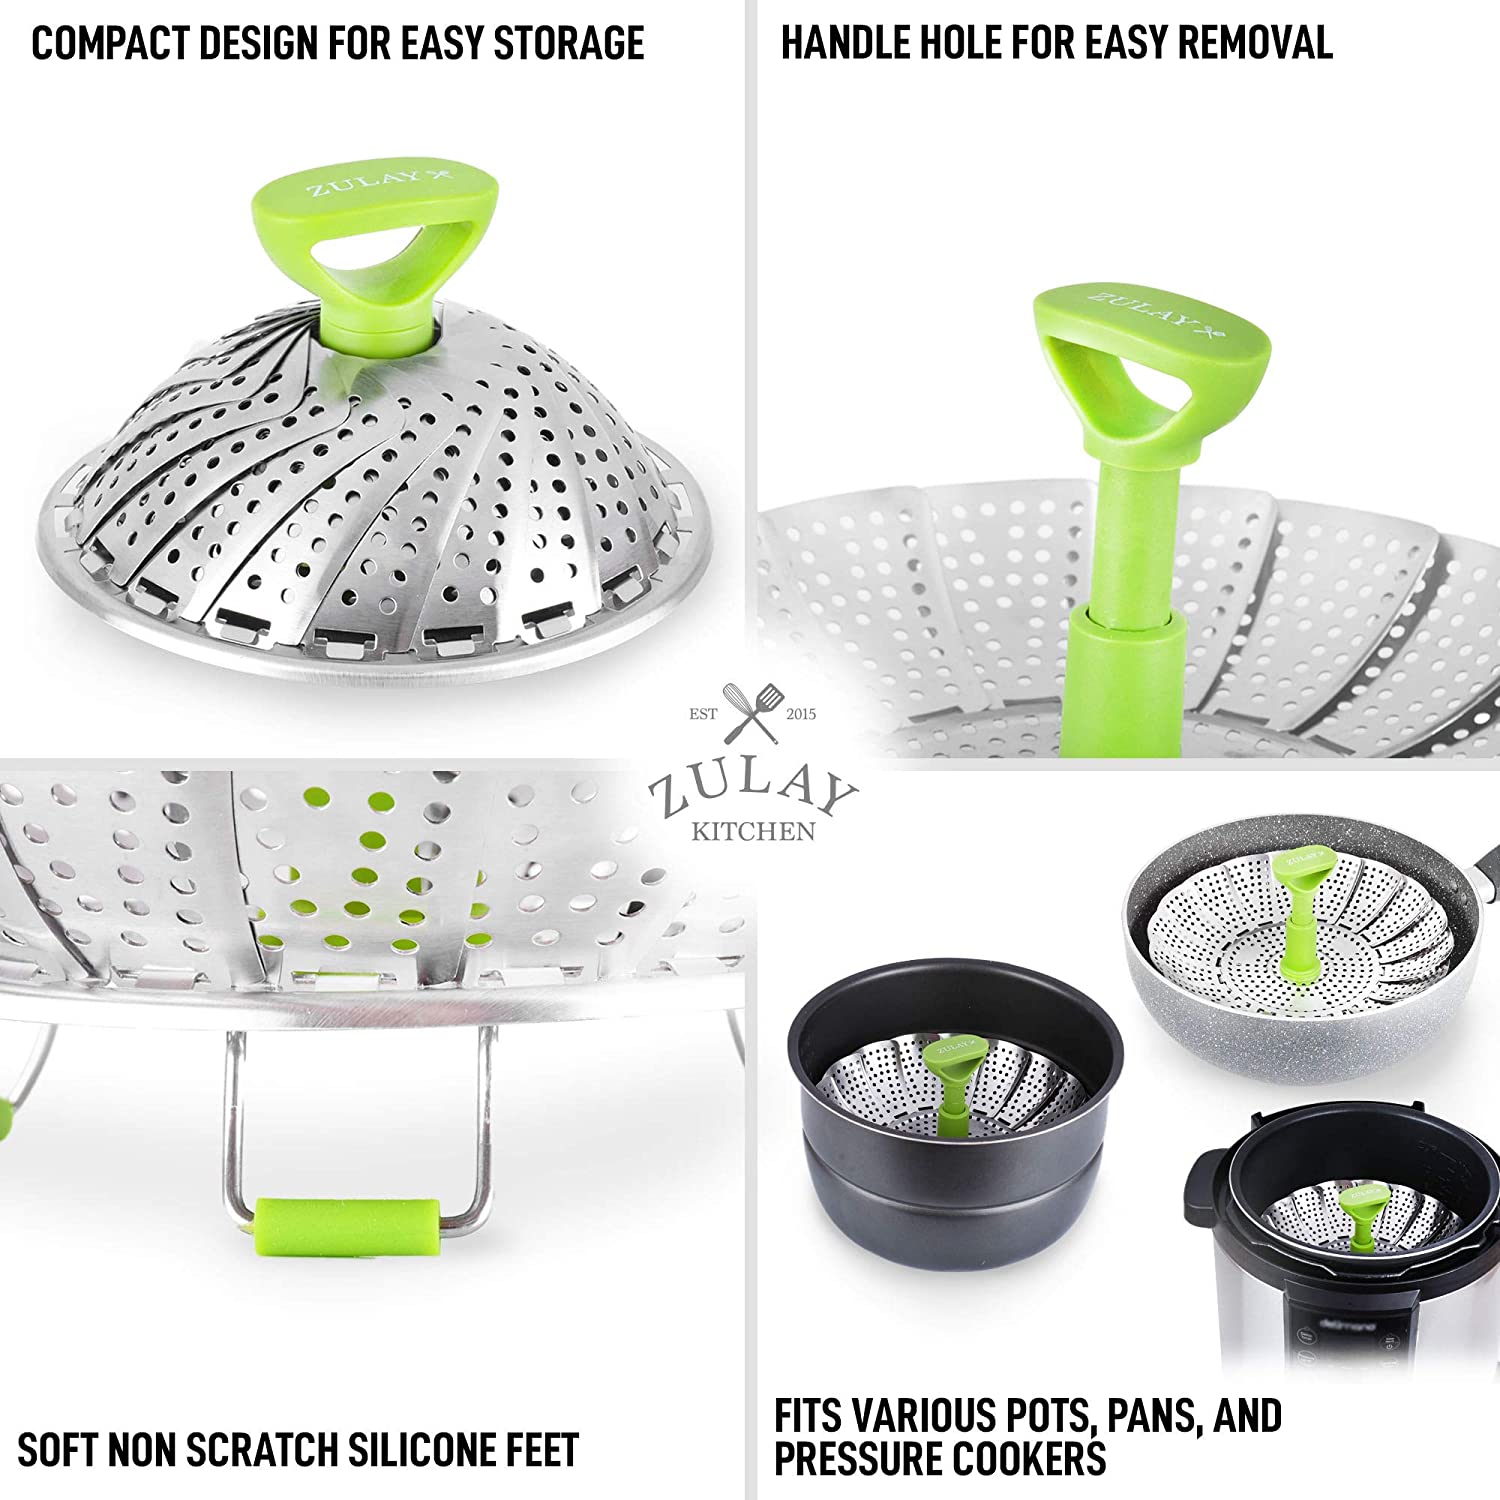 How to Use a Steamer Basket